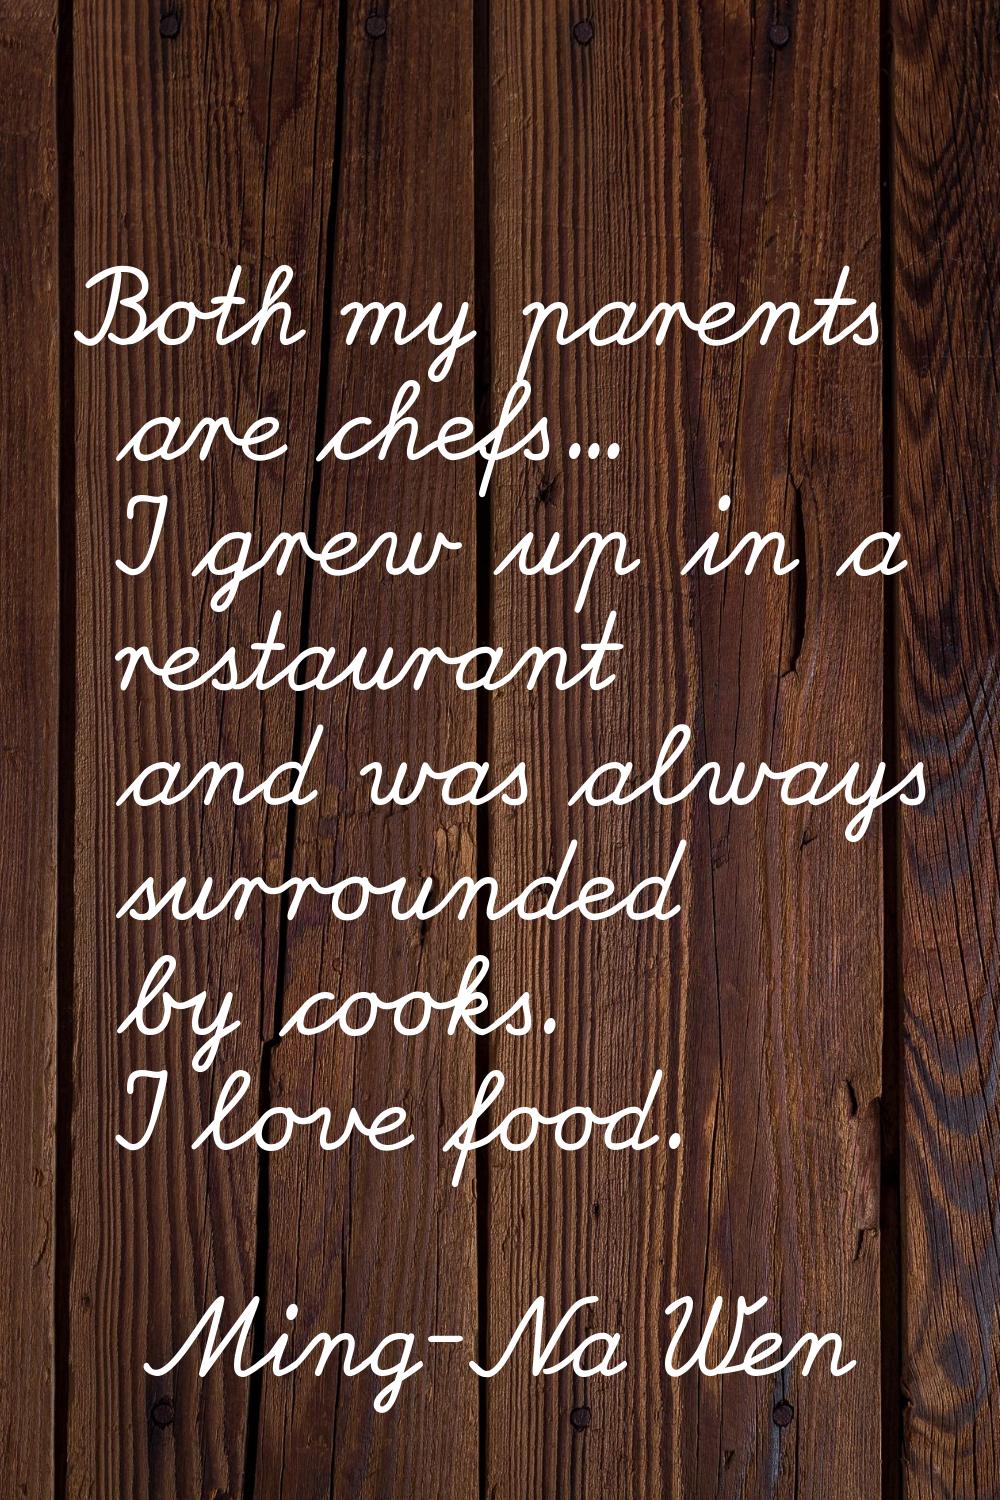 Both my parents are chefs... I grew up in a restaurant and was always surrounded by cooks. I love f